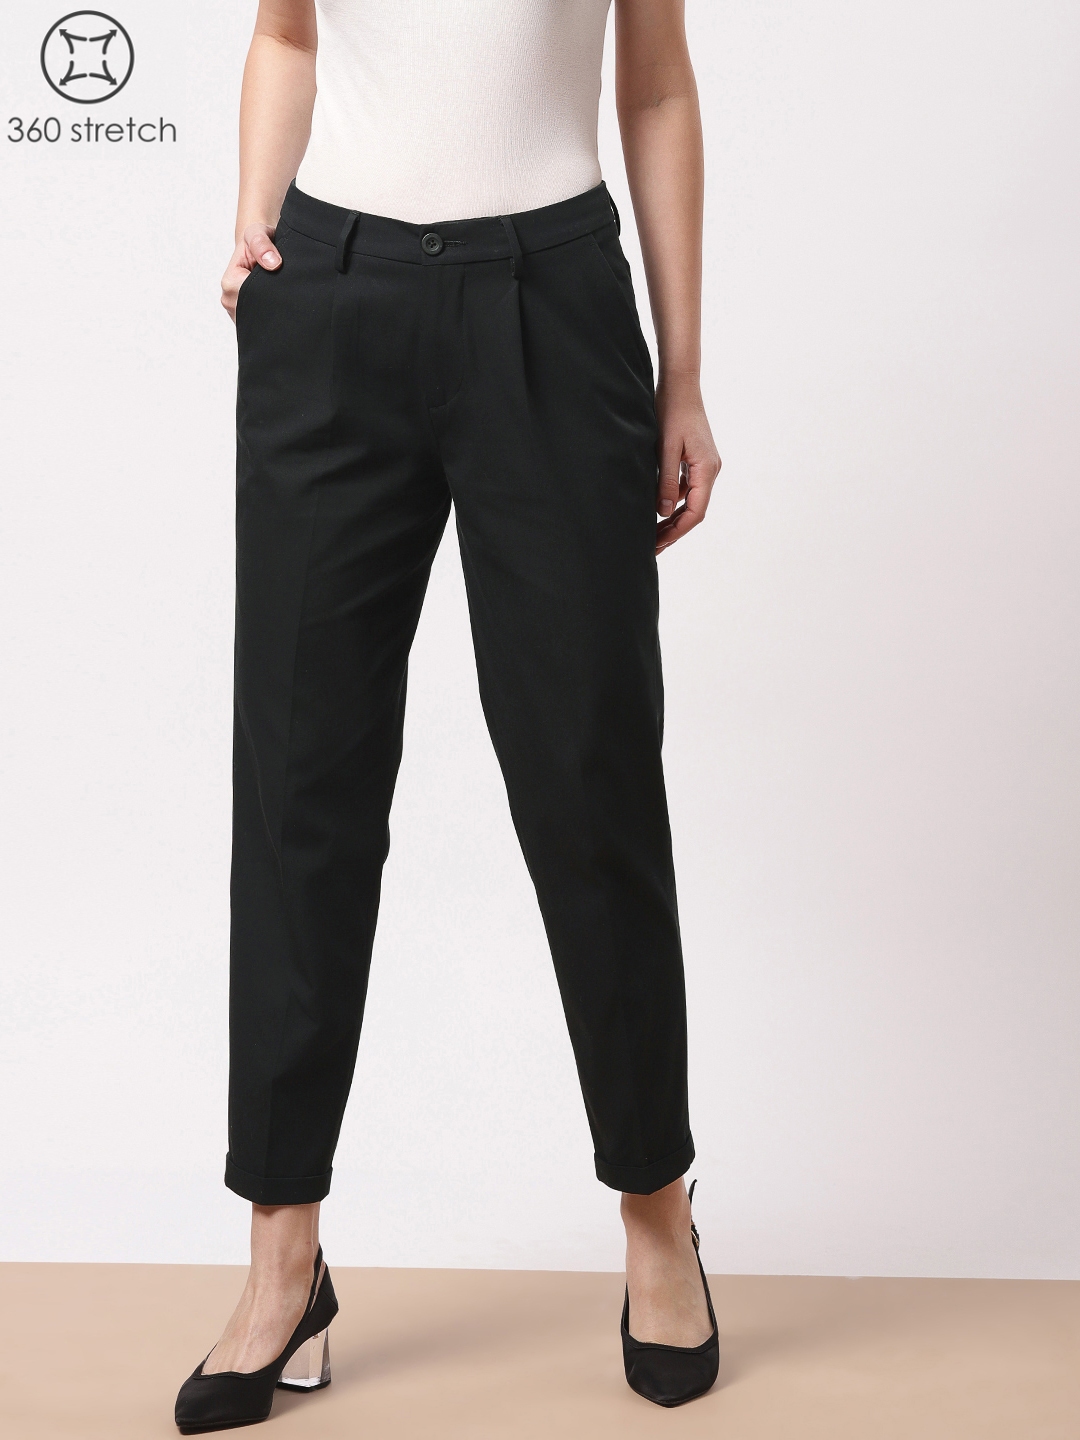 Flattering trousers slimfit trousers that flatter every shape  MS